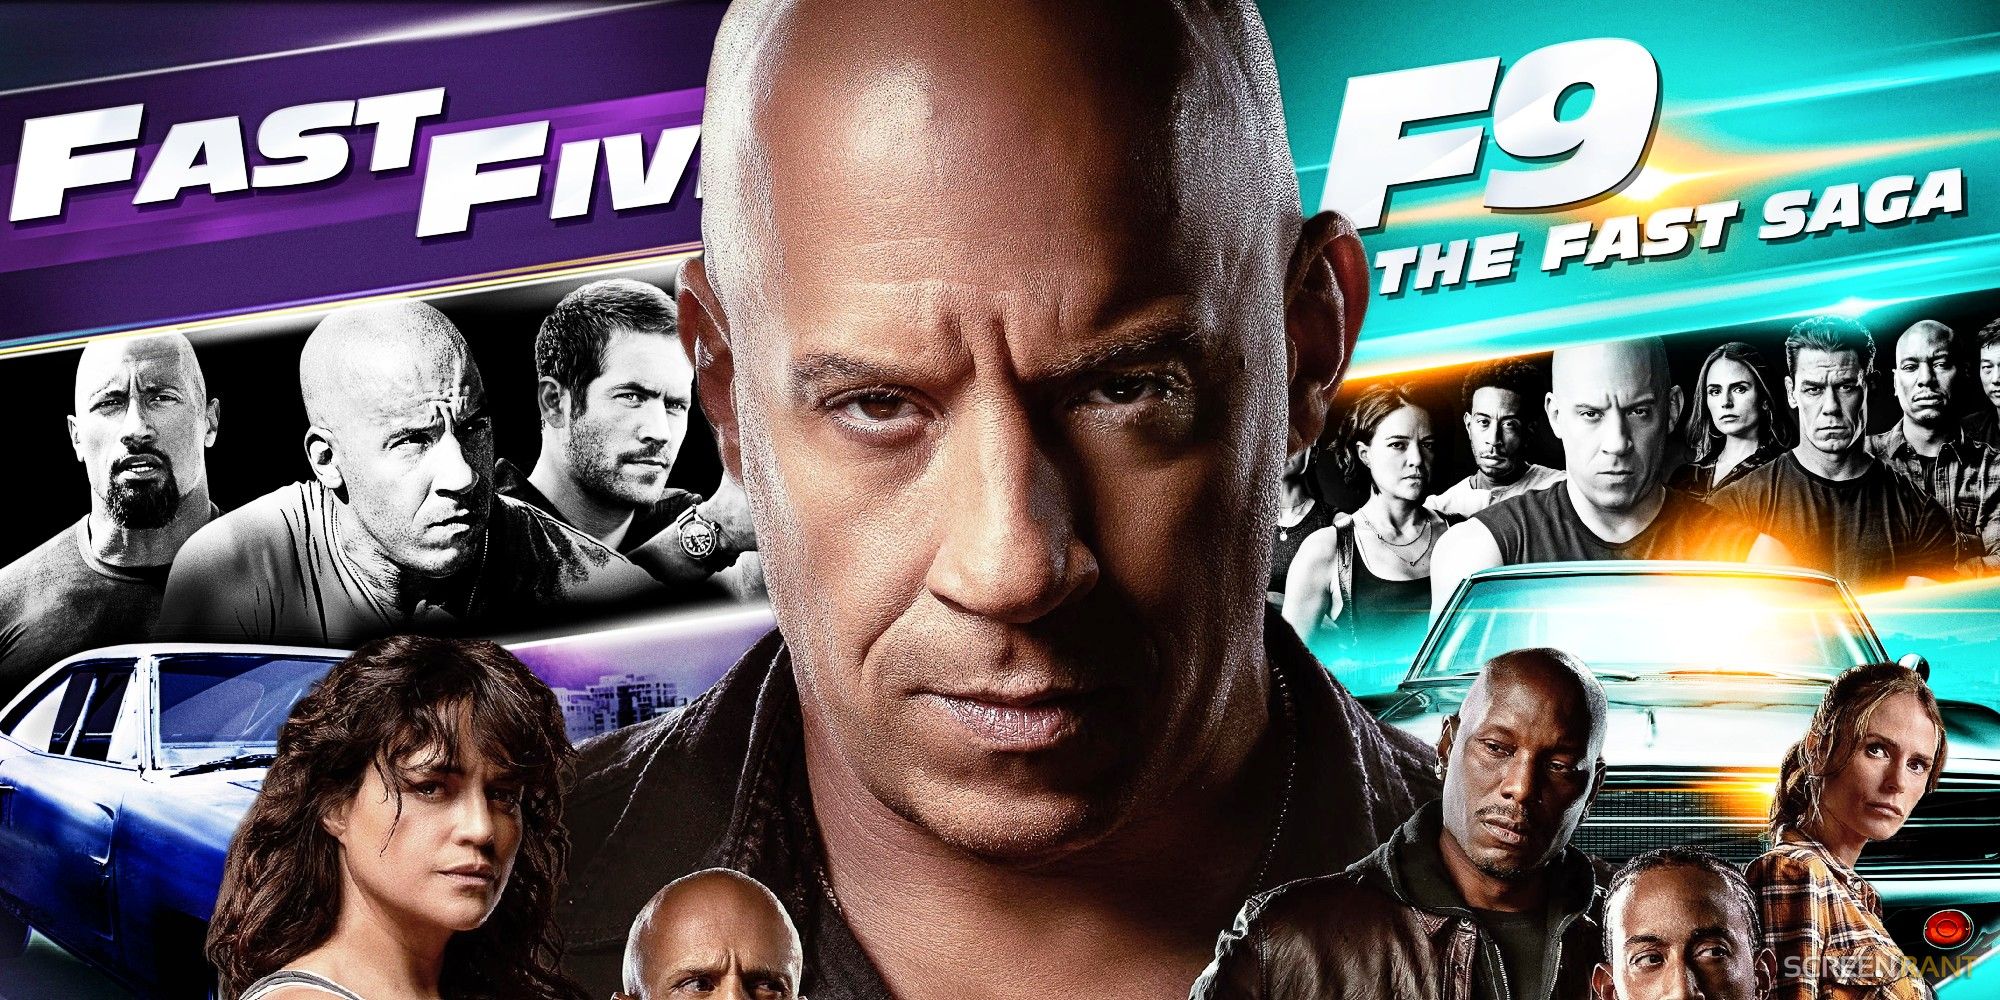 Fast & Furious Rewatch Guide: The Key Movies To Watch Before Fast X